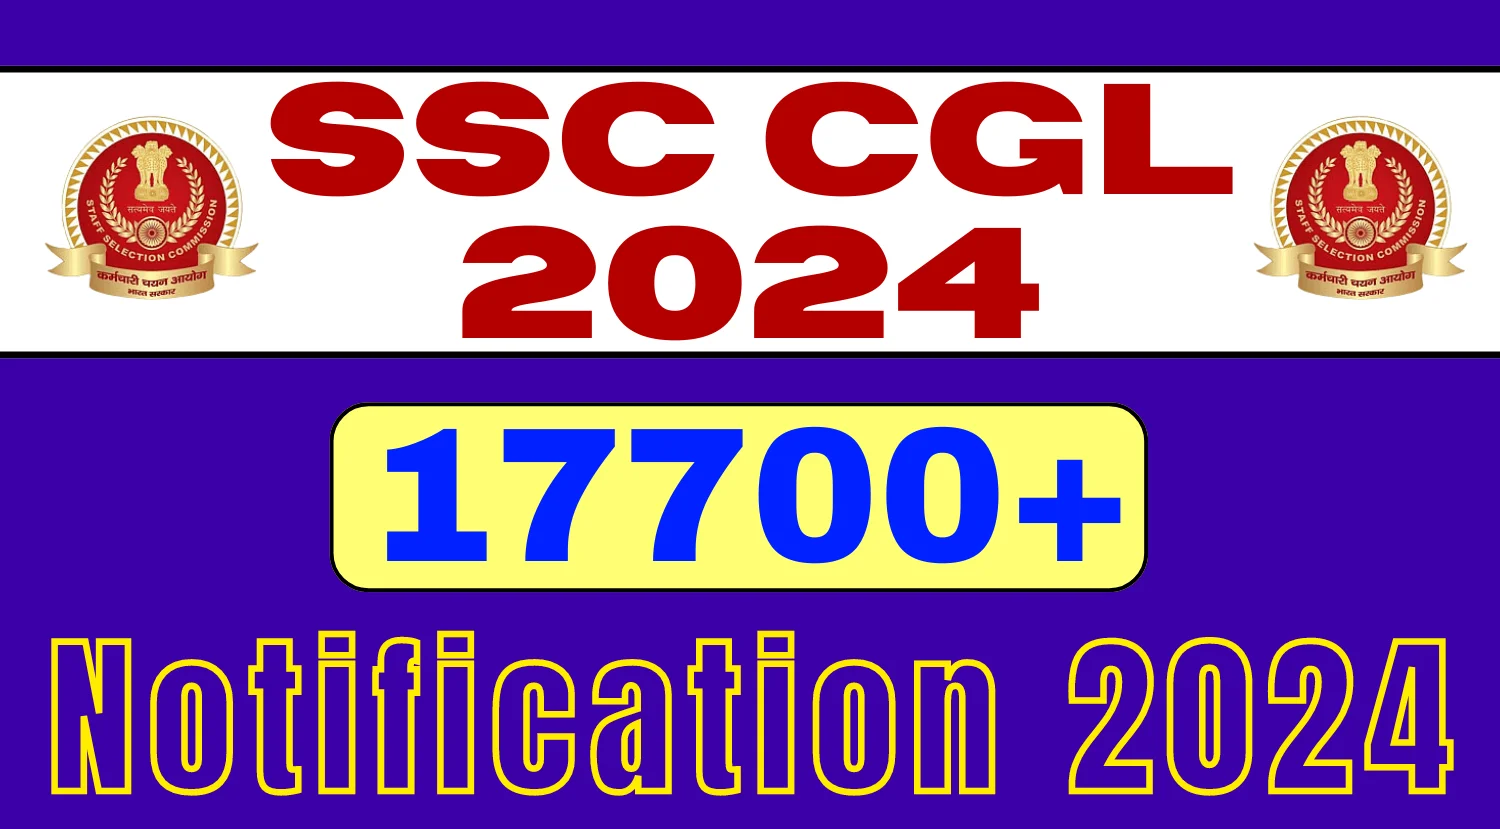 SSC CGL 17700+ Vacancies Notification 2024 Out